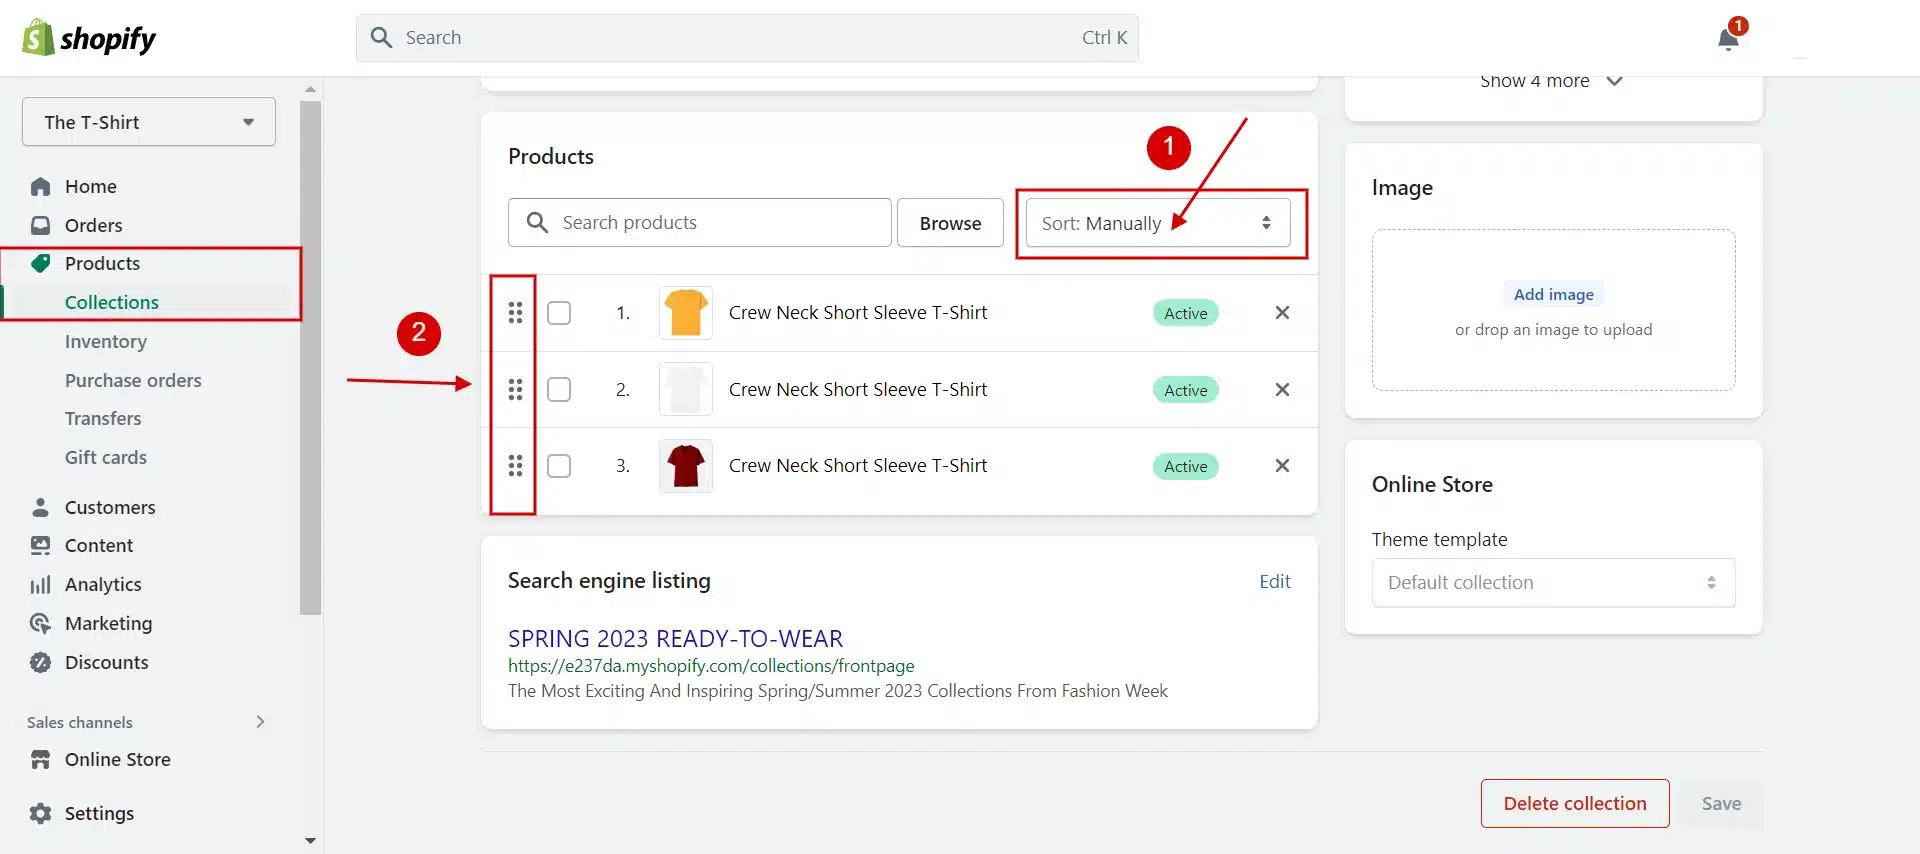 How to manually sort products in Shopify